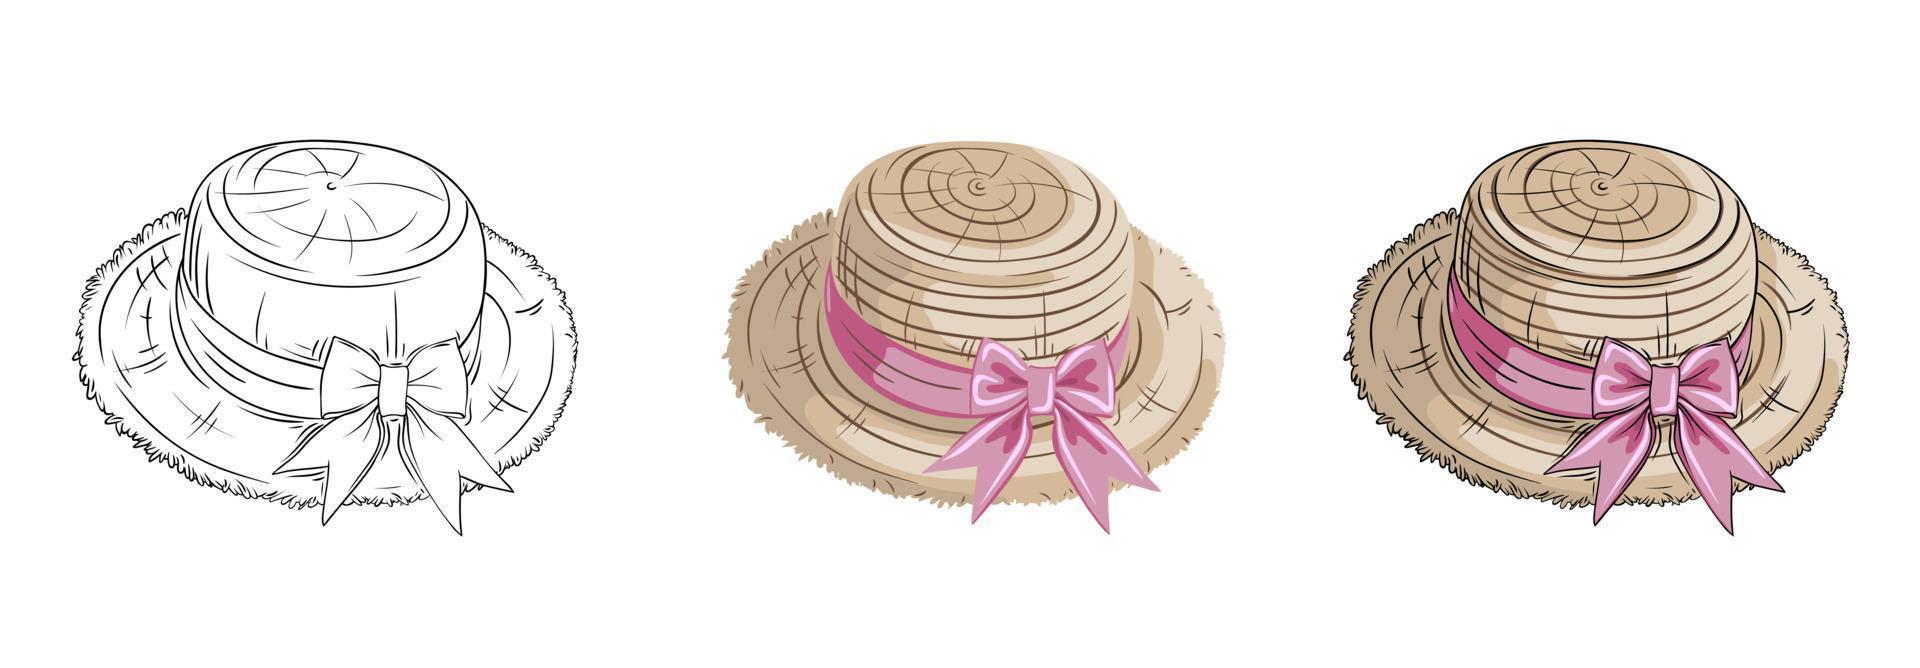 vector set of images of a straw hat with a bow on a transparent background